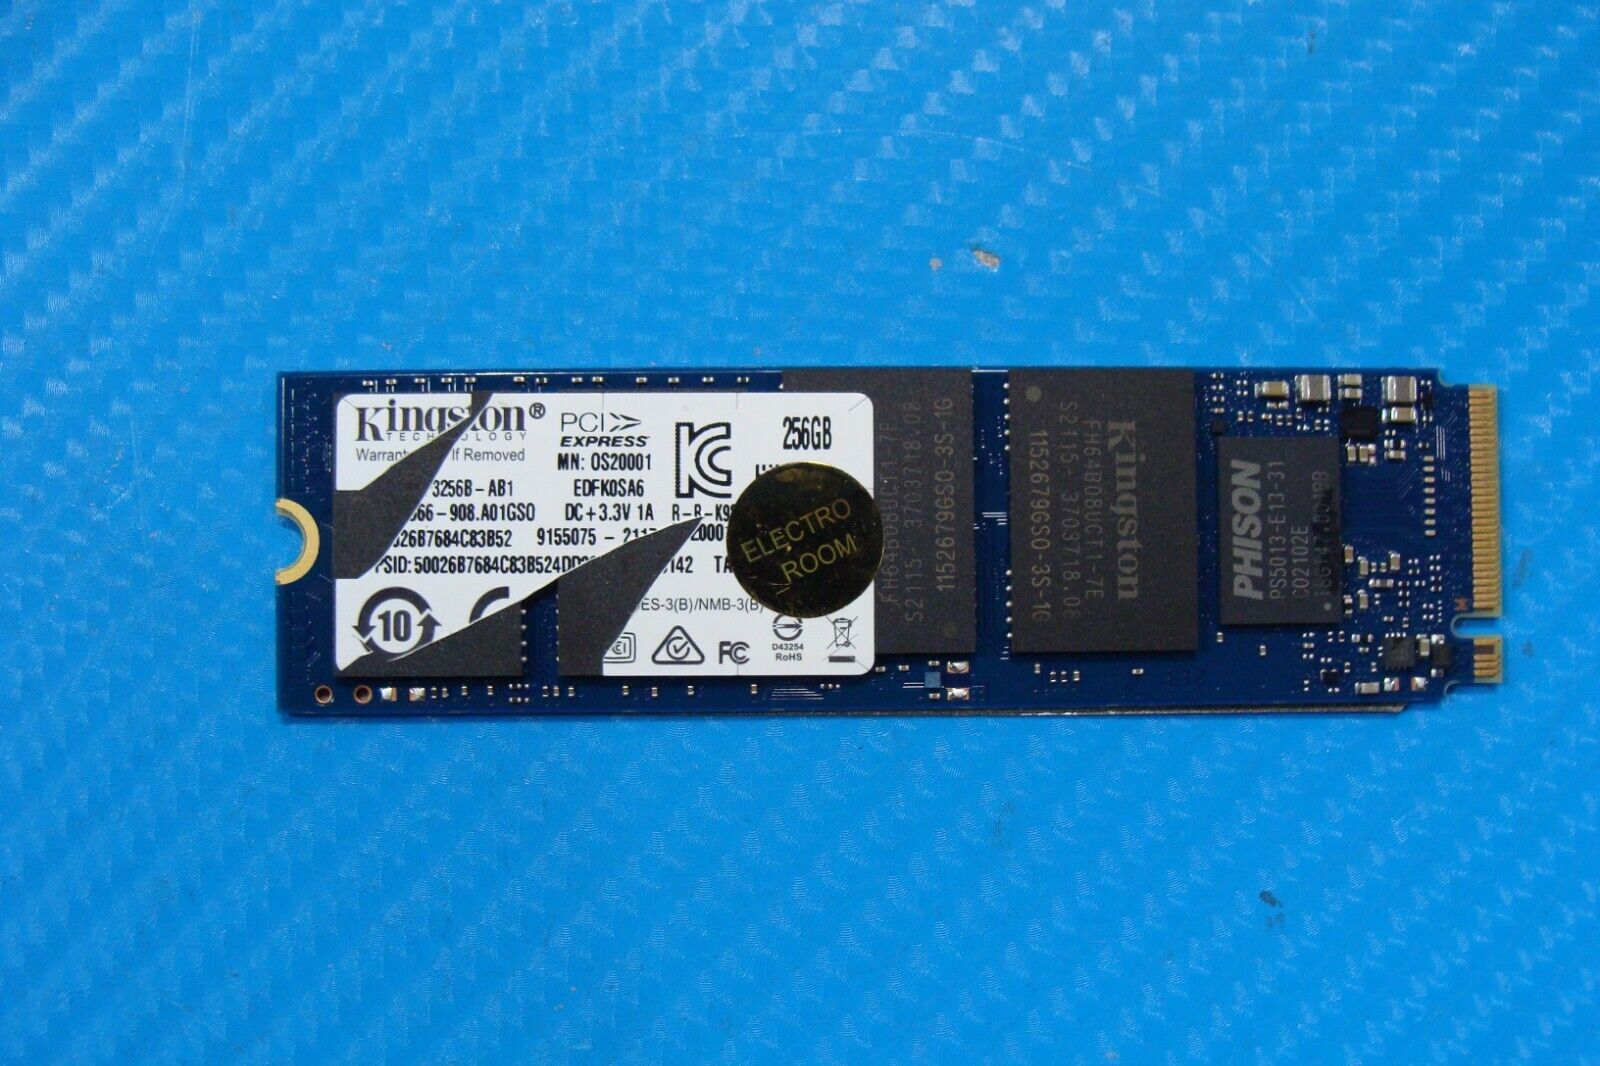 Asus F513EA-OS36 Kingston 256GB M.2 NVMe SSD Solid State Drive 9155075-2117